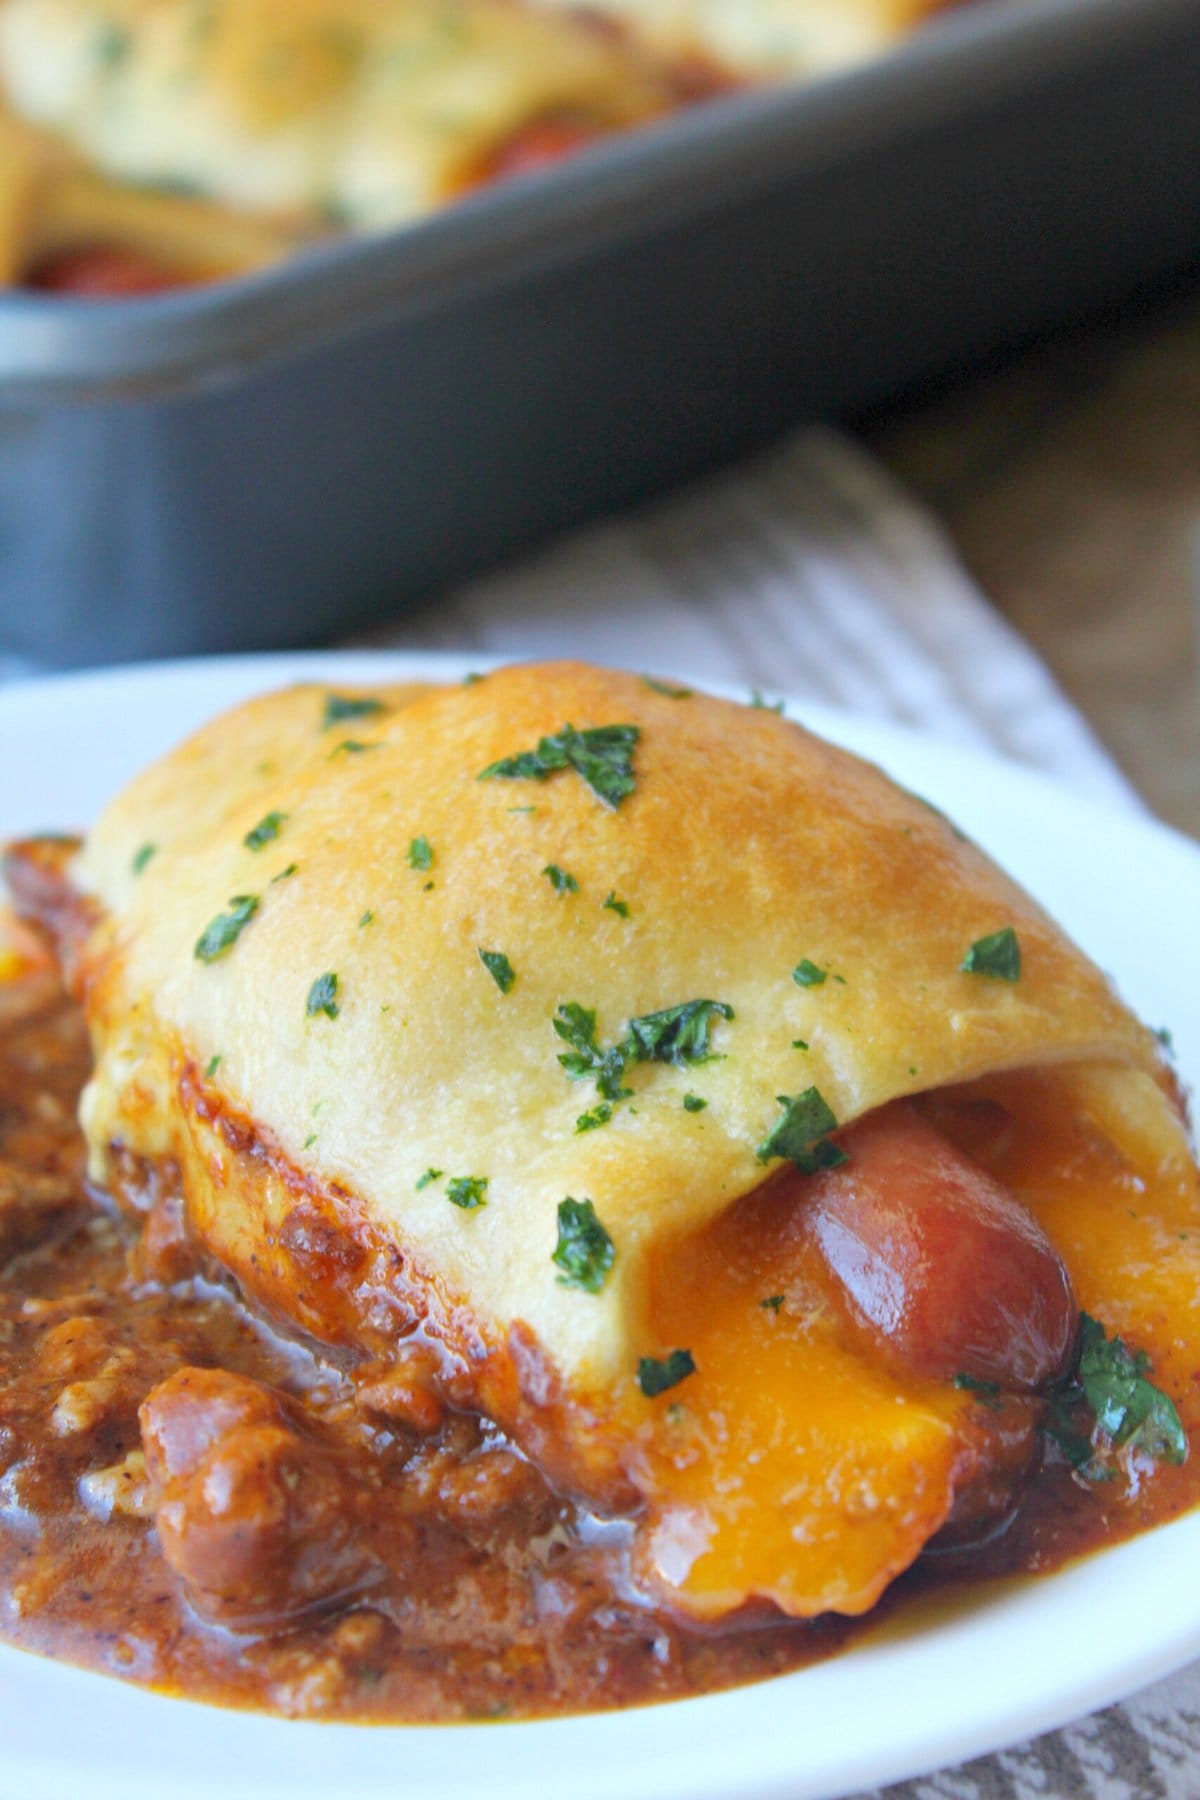 Chili Cheese Dog Bake on a plate